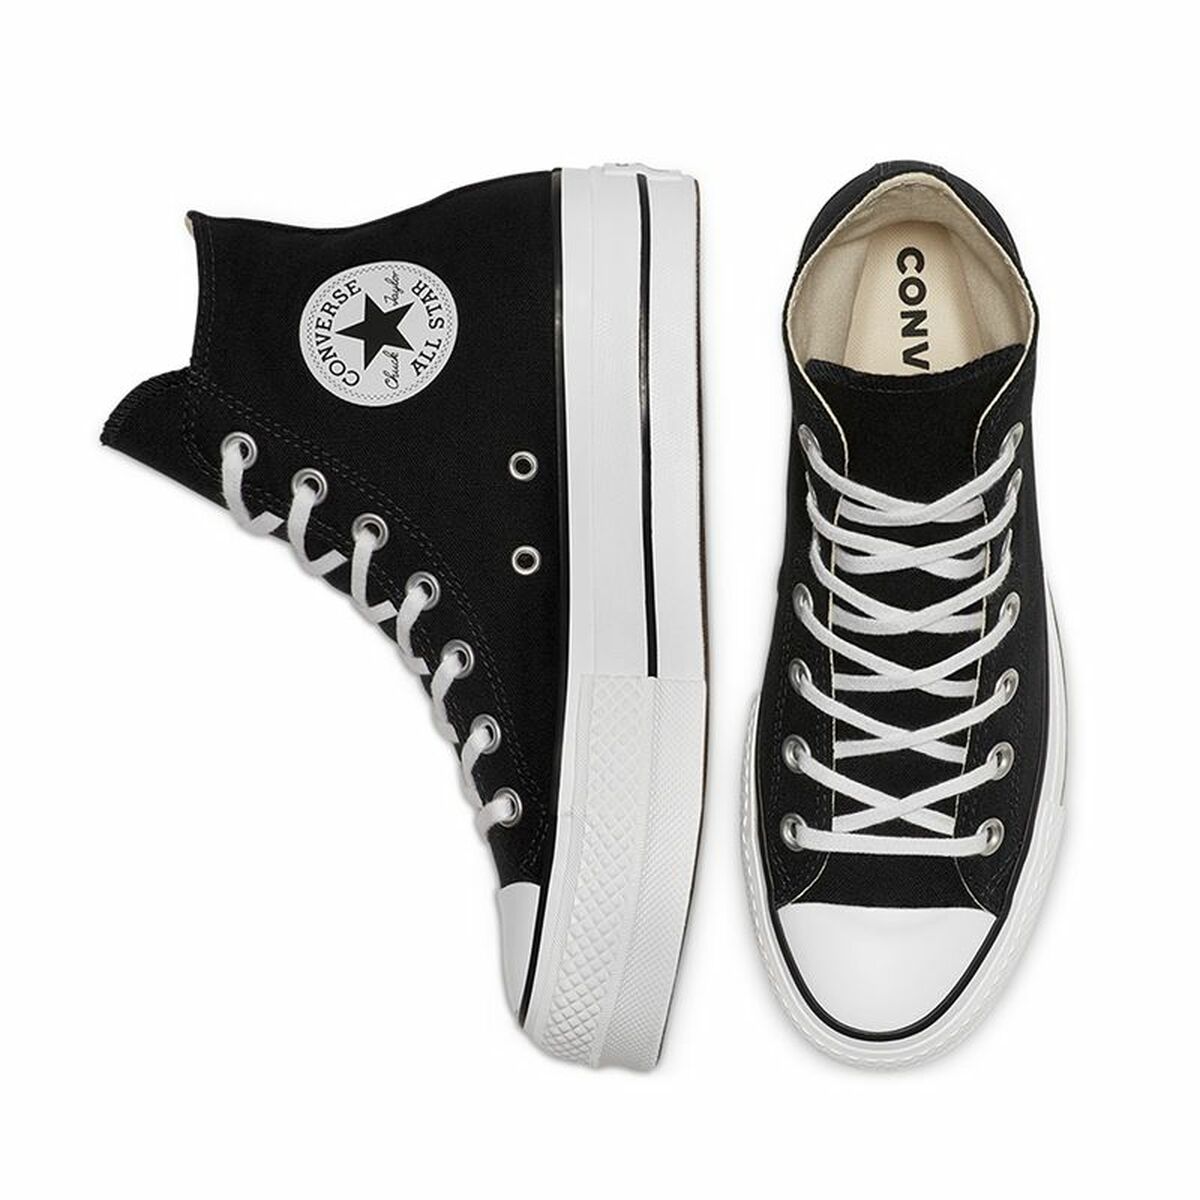 Women’s Casual Trainers Converse Chuck Taylor All Star Platform Black